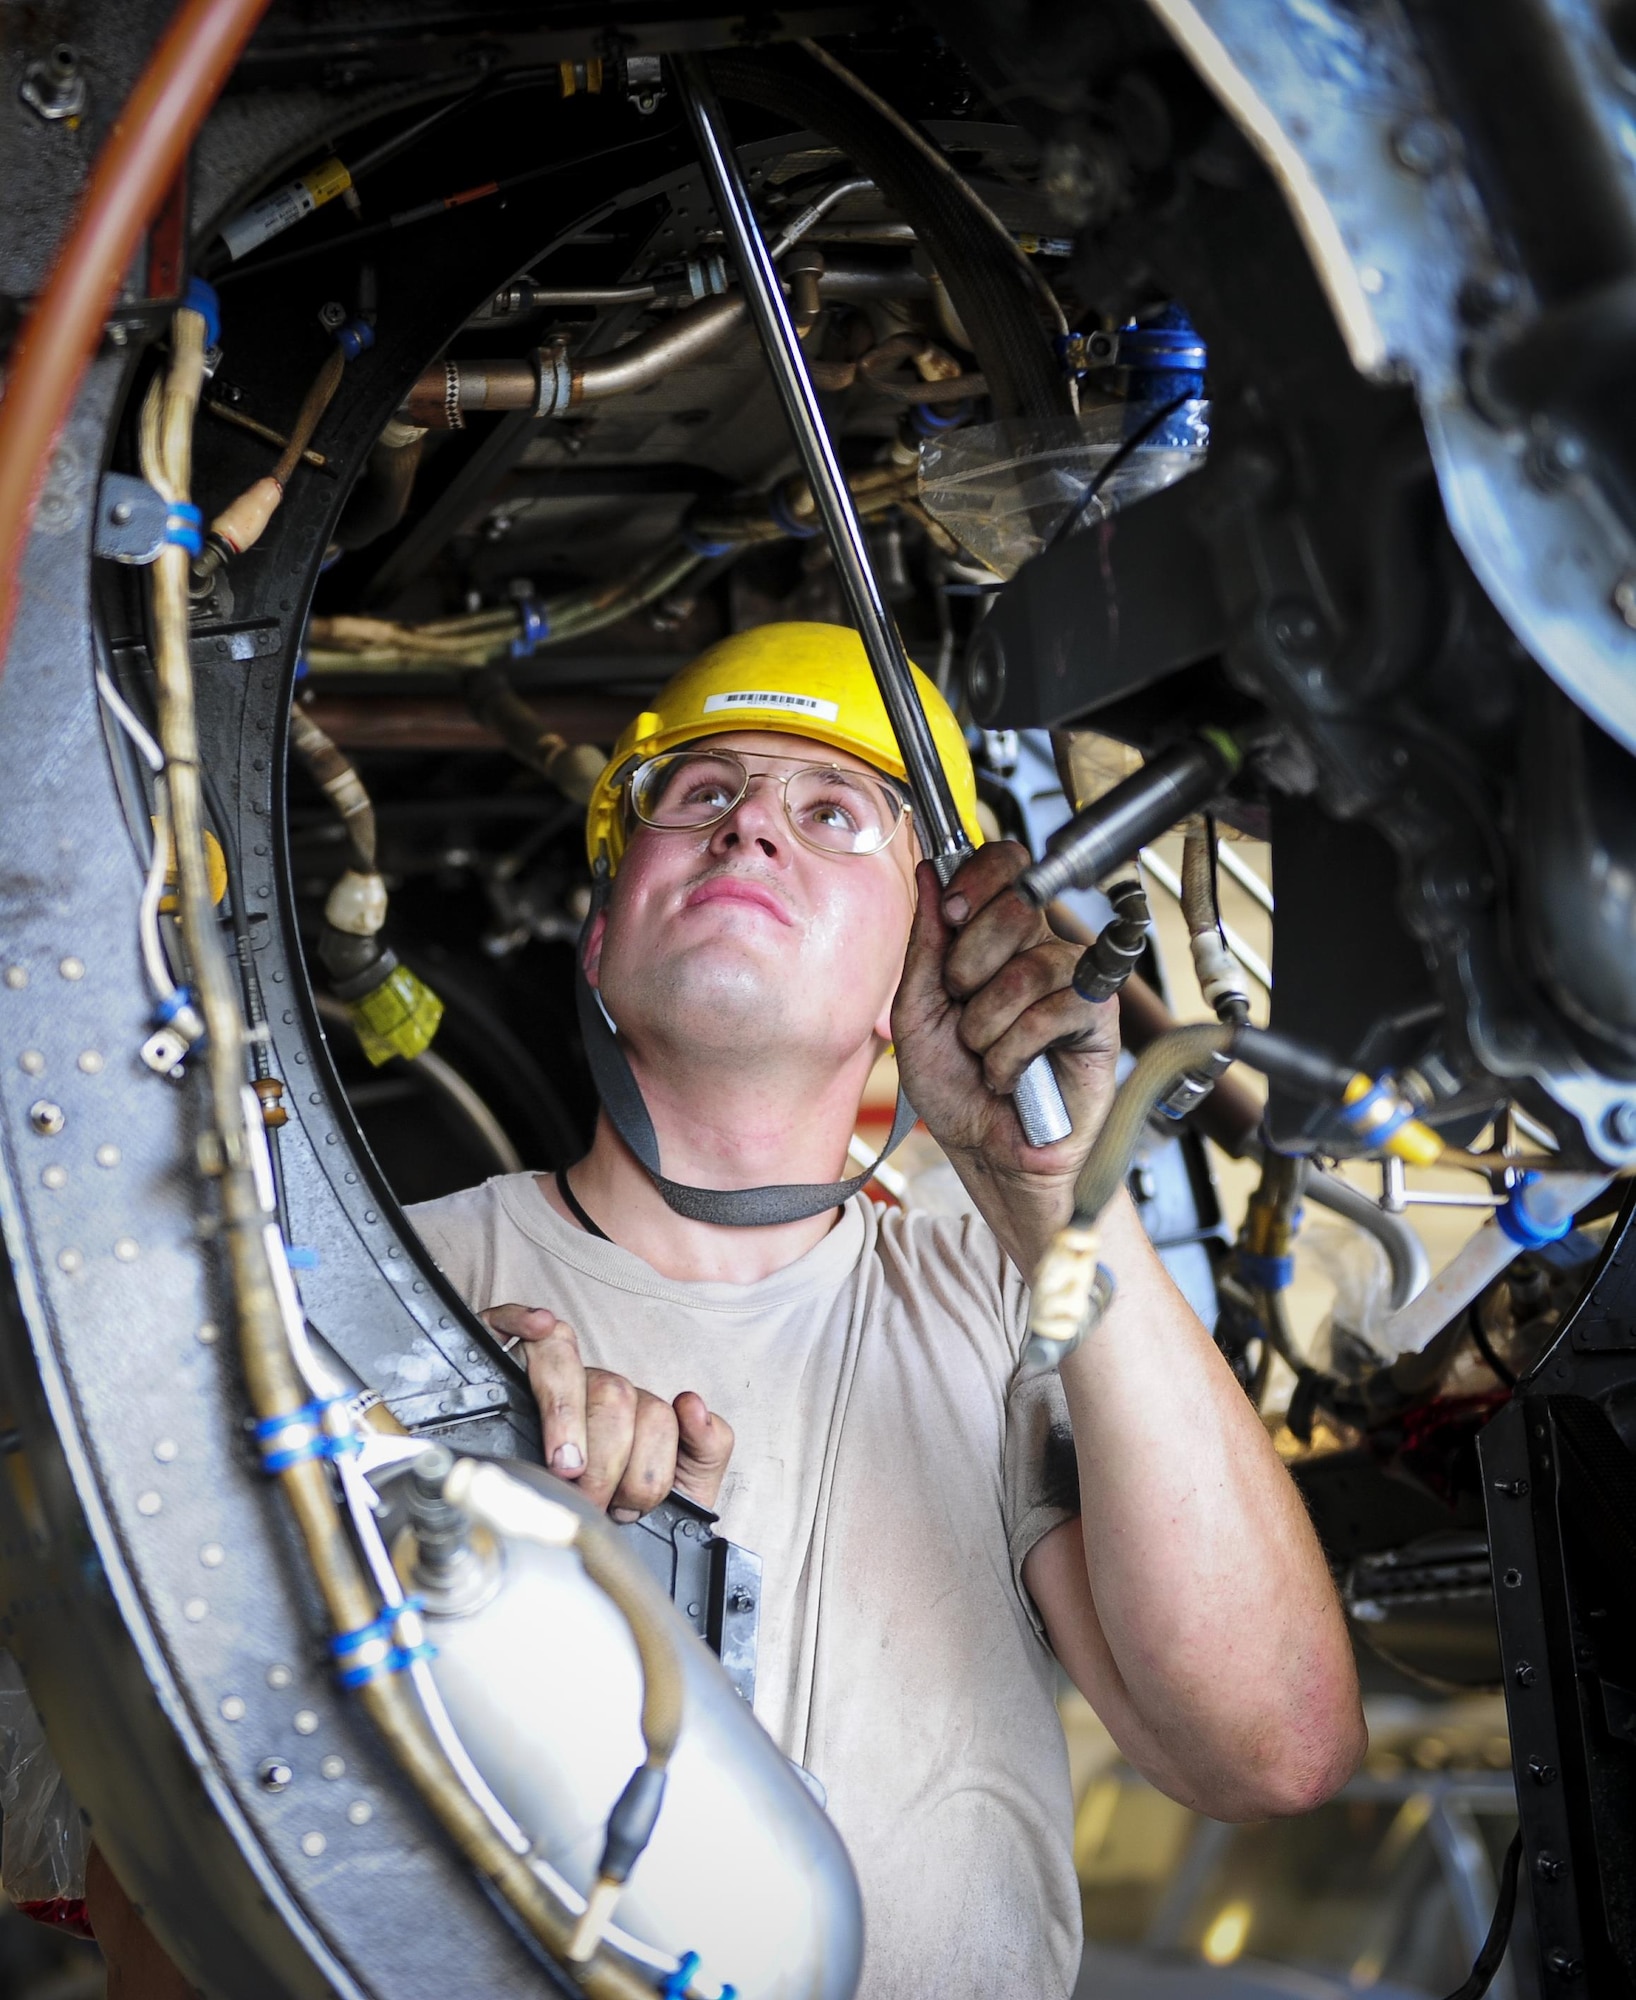 Airman 1st Class Richard Bassett, 801st Special Operations Aircraft Maintenance Squadron crew chief, loosens torque bolts on a CV-22B Osprey gear box on the flight line at Hurlburt Field Fla., July 20, 2015. The 801st SOAMXS’s mission is to perform all equipment maintenance in support of worldwide special operations missions in response to national command authority taskings for the CV-22B Osprey and the MC-130H Talon II. Maintenance includes aircraft servicing, phase inspections, troubleshooting, repair, modifications and launch recovery for all aircraft. (U.S. Air Force photo/Senior Airman Meagan Schutter)